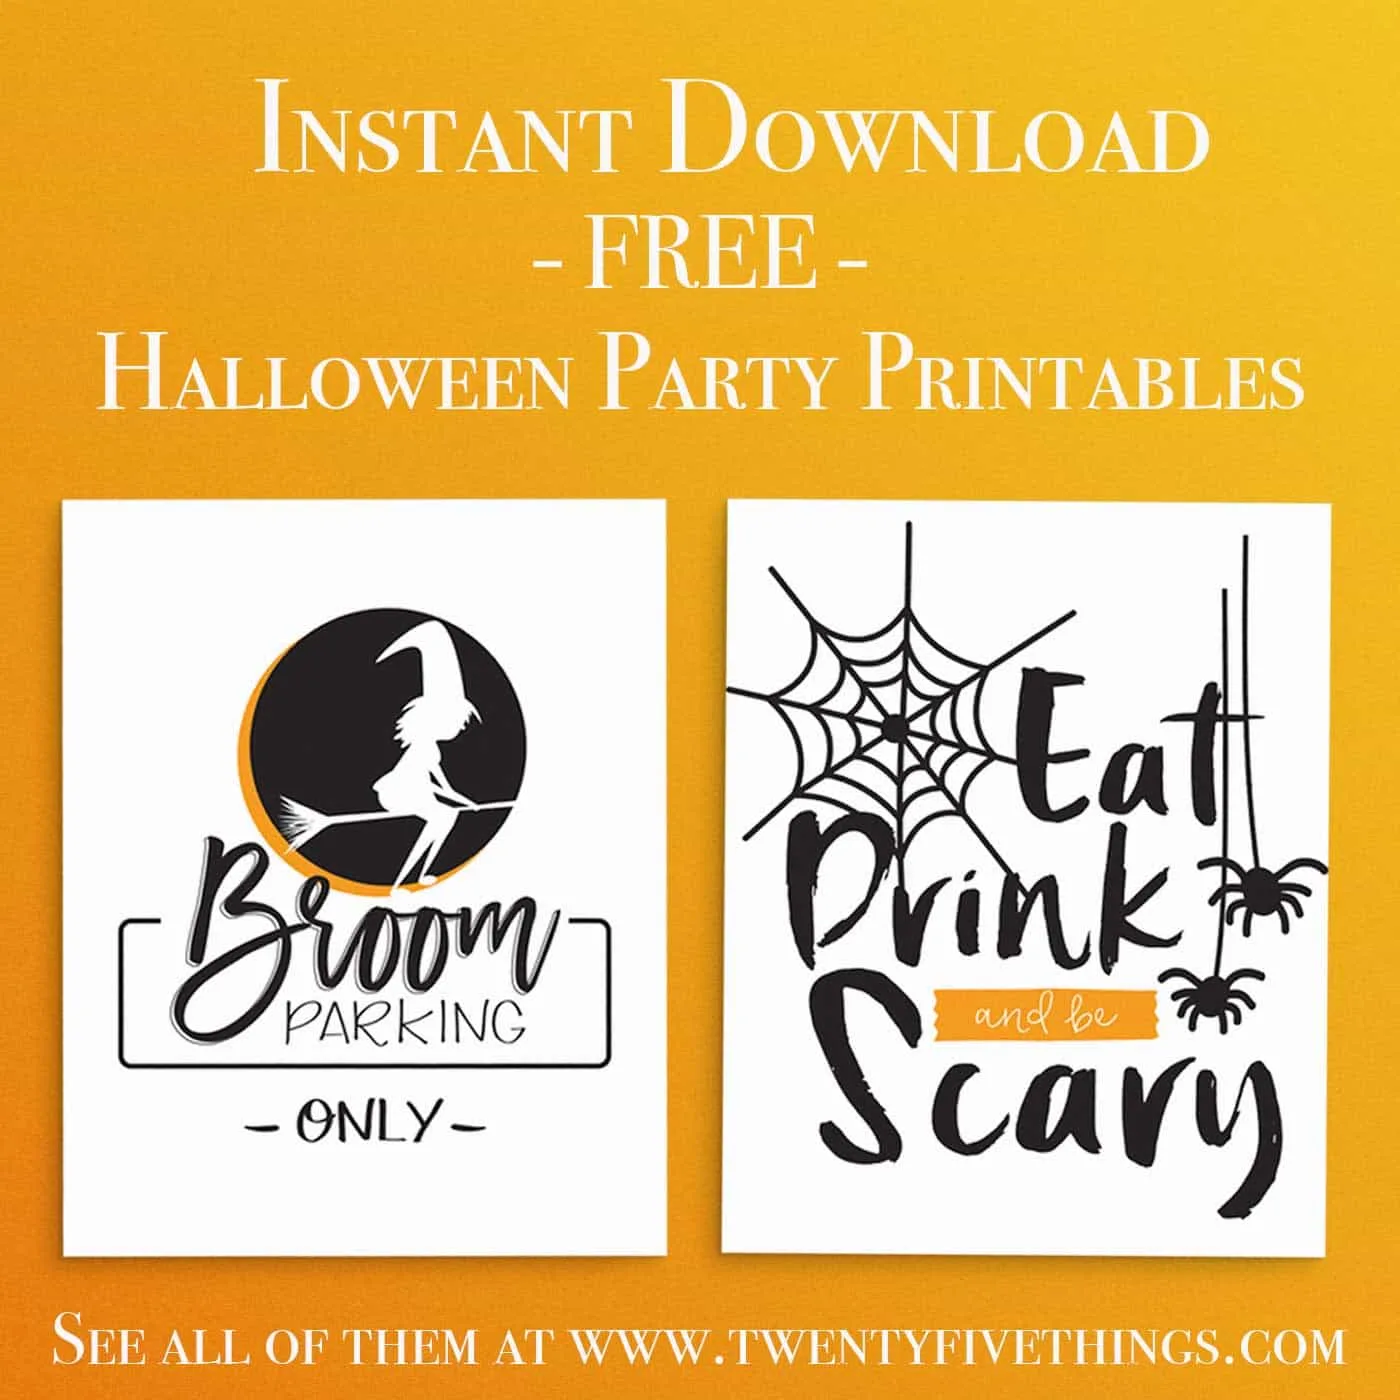 Download and print these Free Halloween Party Printables for your Halloween party. Includes Broom Parking print and Eat Drink and be Scary print. 